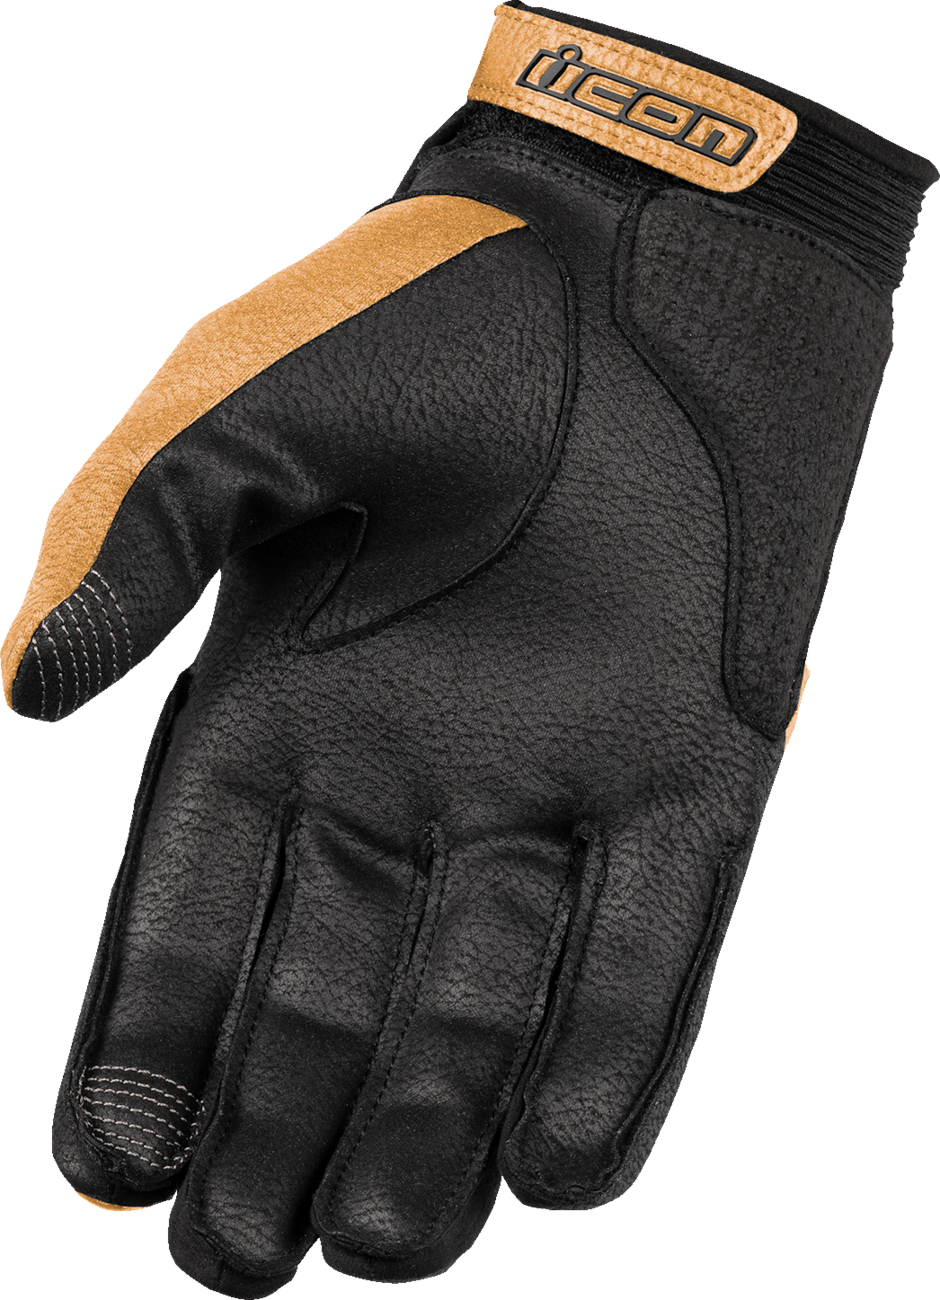 ICON Superduty3™ CE Gloves - Tan - Large 3301-4602